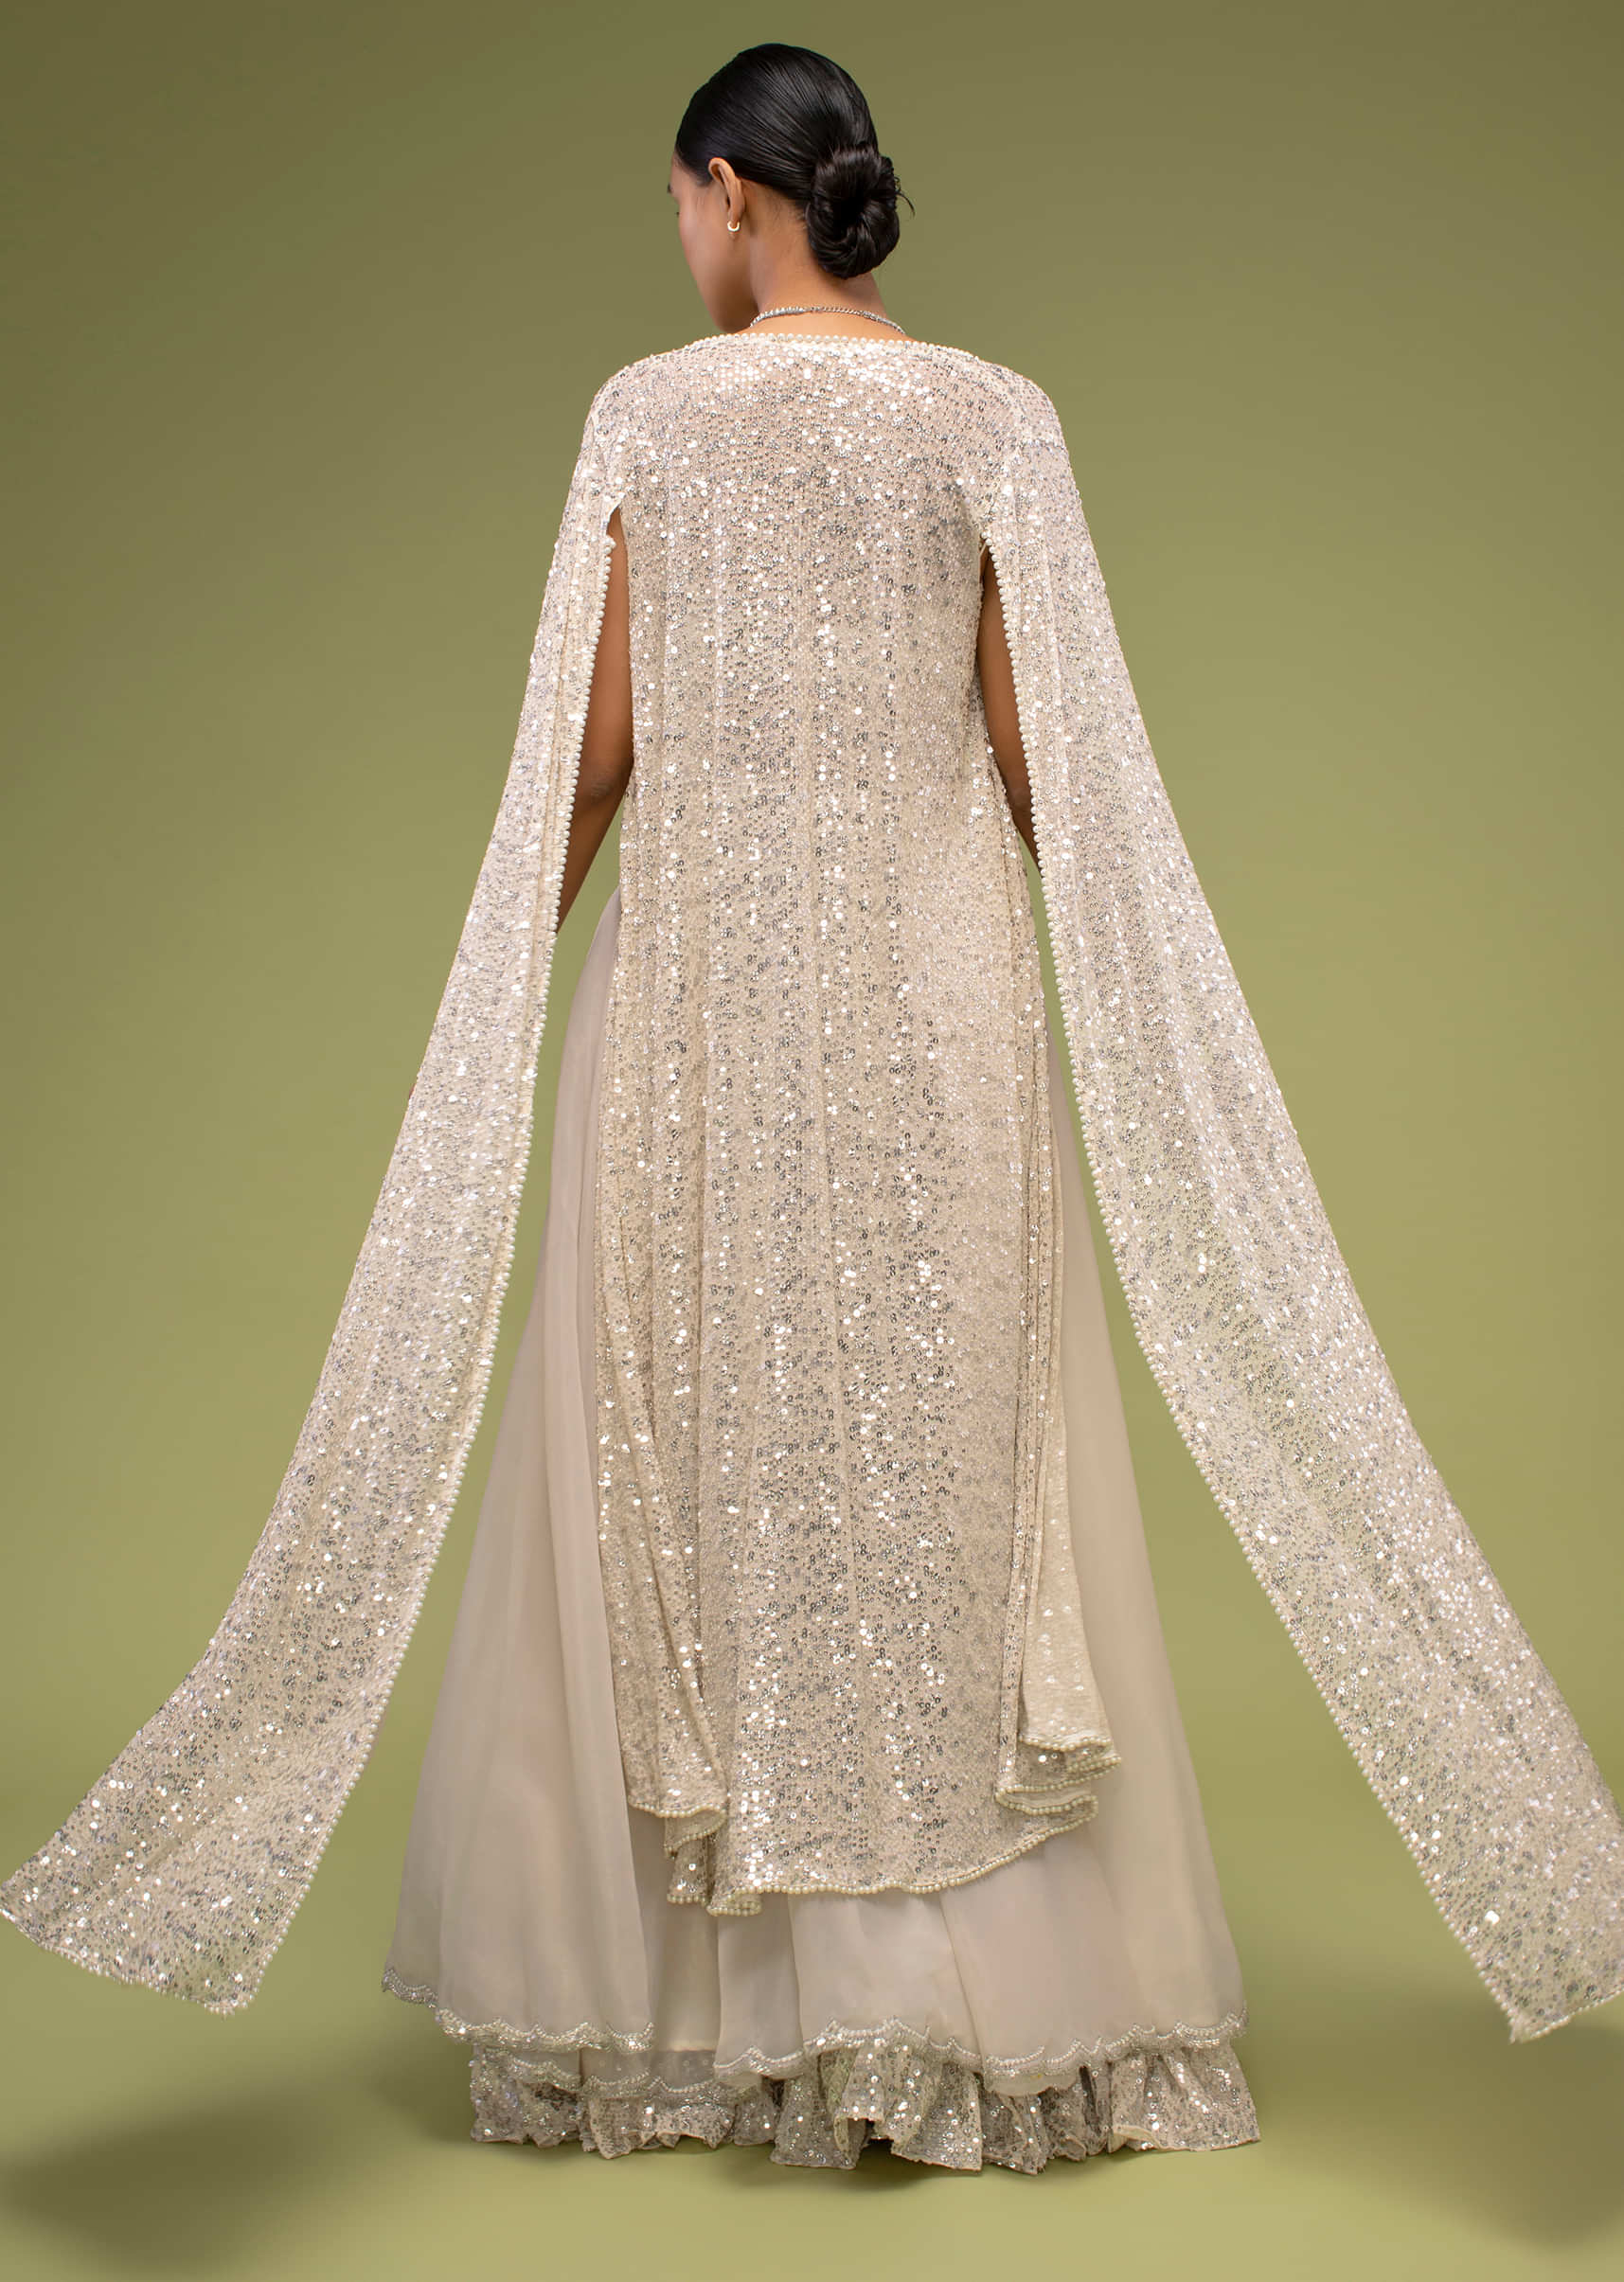 Turtledove White Sharara Suit In Sequins Embroidery, Paired With A Long Embroidery Cape